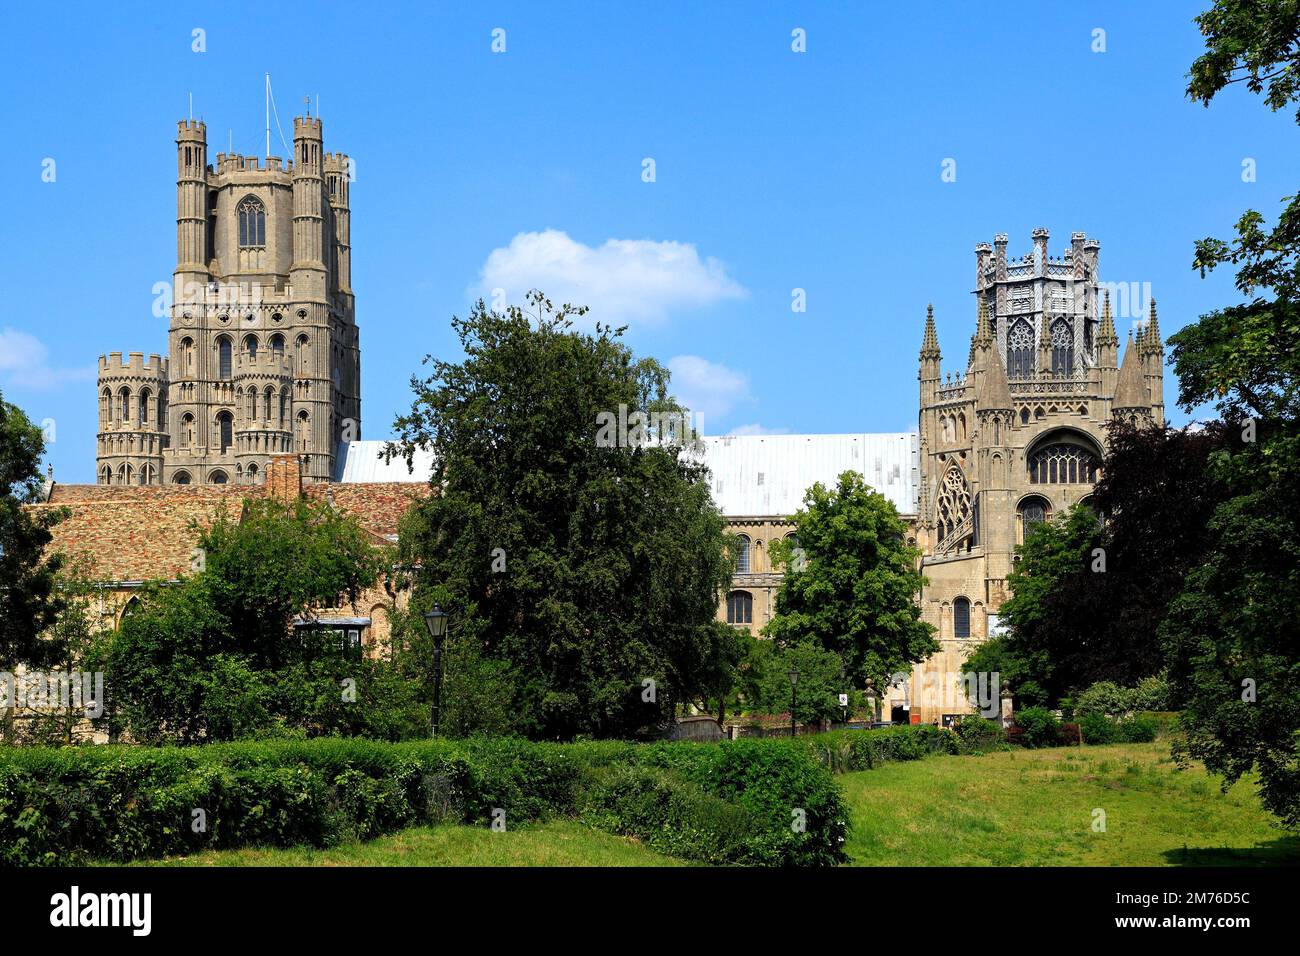 Ely Cathedral, West Tower, Octagon Tower, Lantern Tower, Cambridgeshire, England Stockfoto